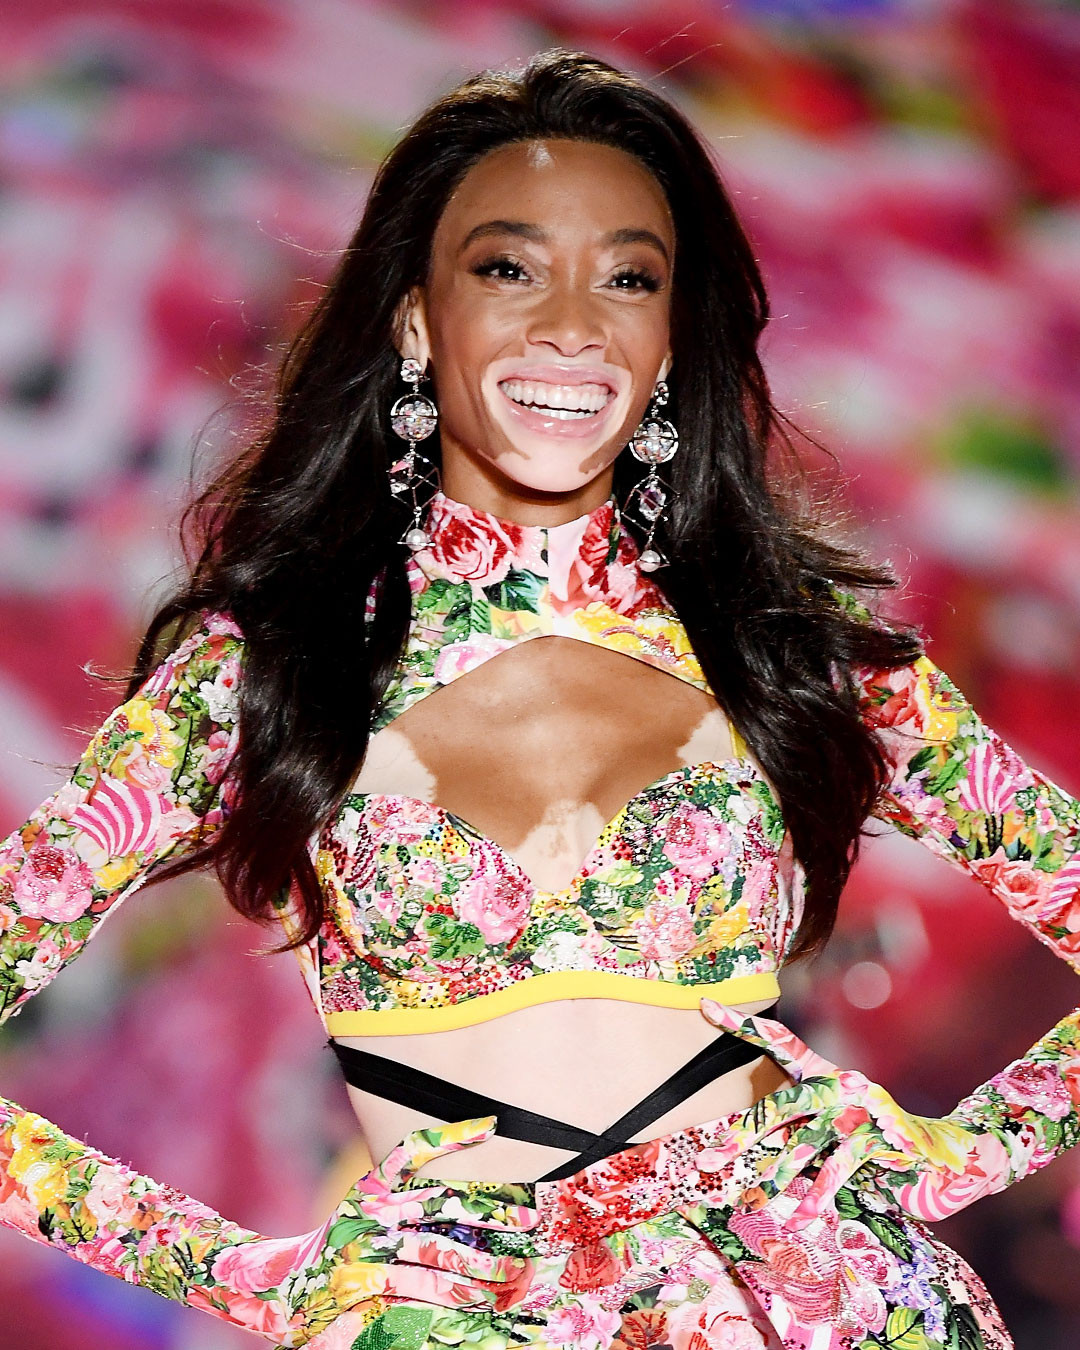 https://akns-images.eonline.com/eol_images/Entire_Site/2018109/rs_1080x1350-181109103353-1080x1350-Winnie-Harlow-GettyImages-1059423618.jpg?fit=around%7C1080:1350&output-quality=90&crop=1080:1350;center,top